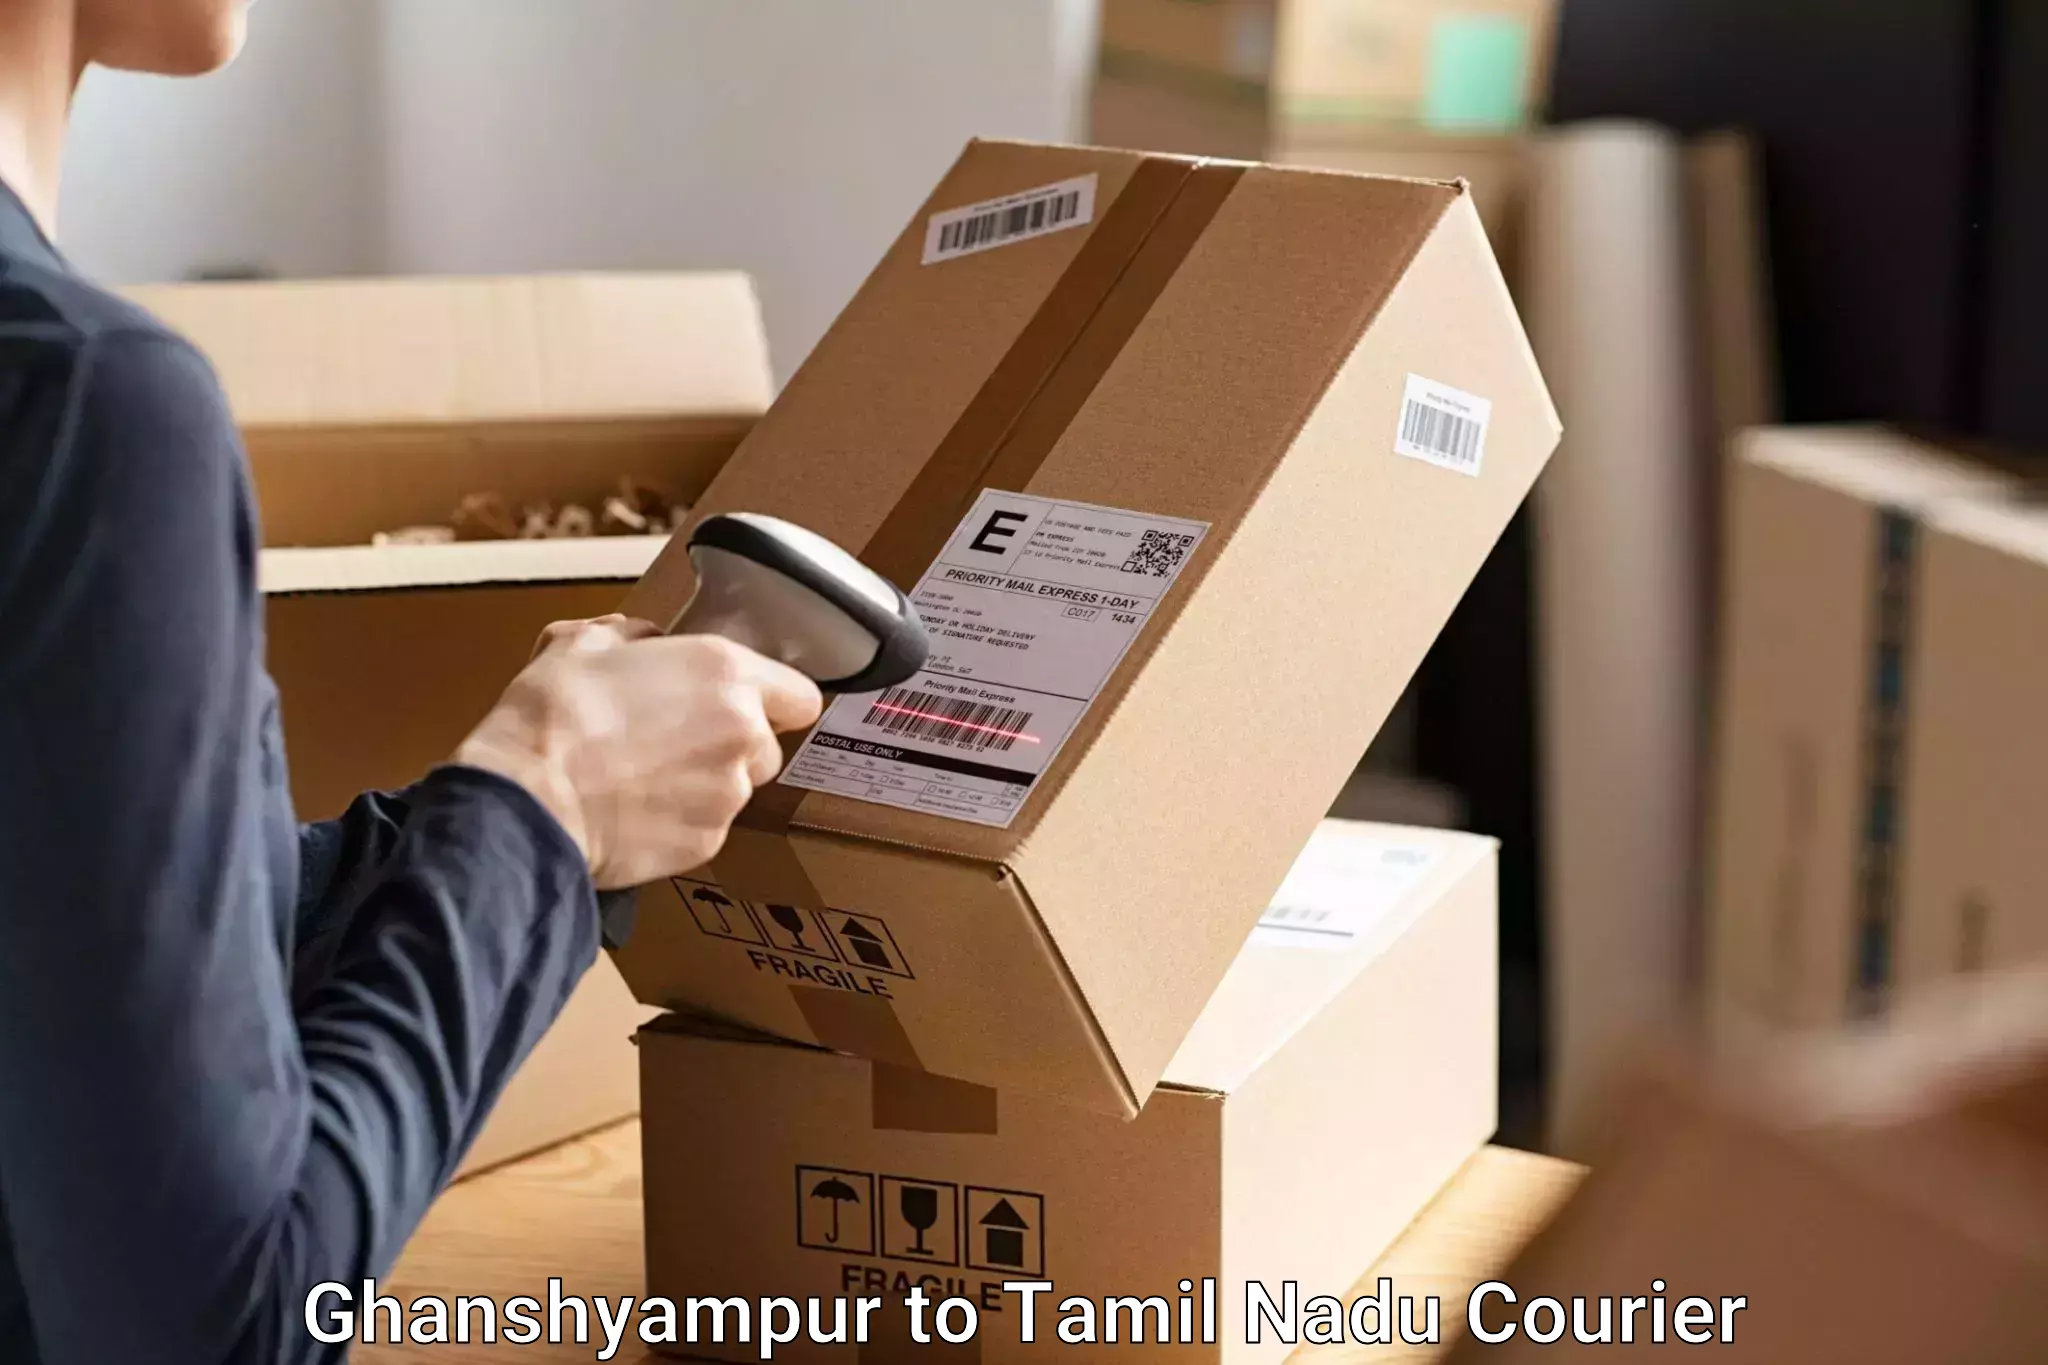 Luggage delivery system Ghanshyampur to Palayankottai